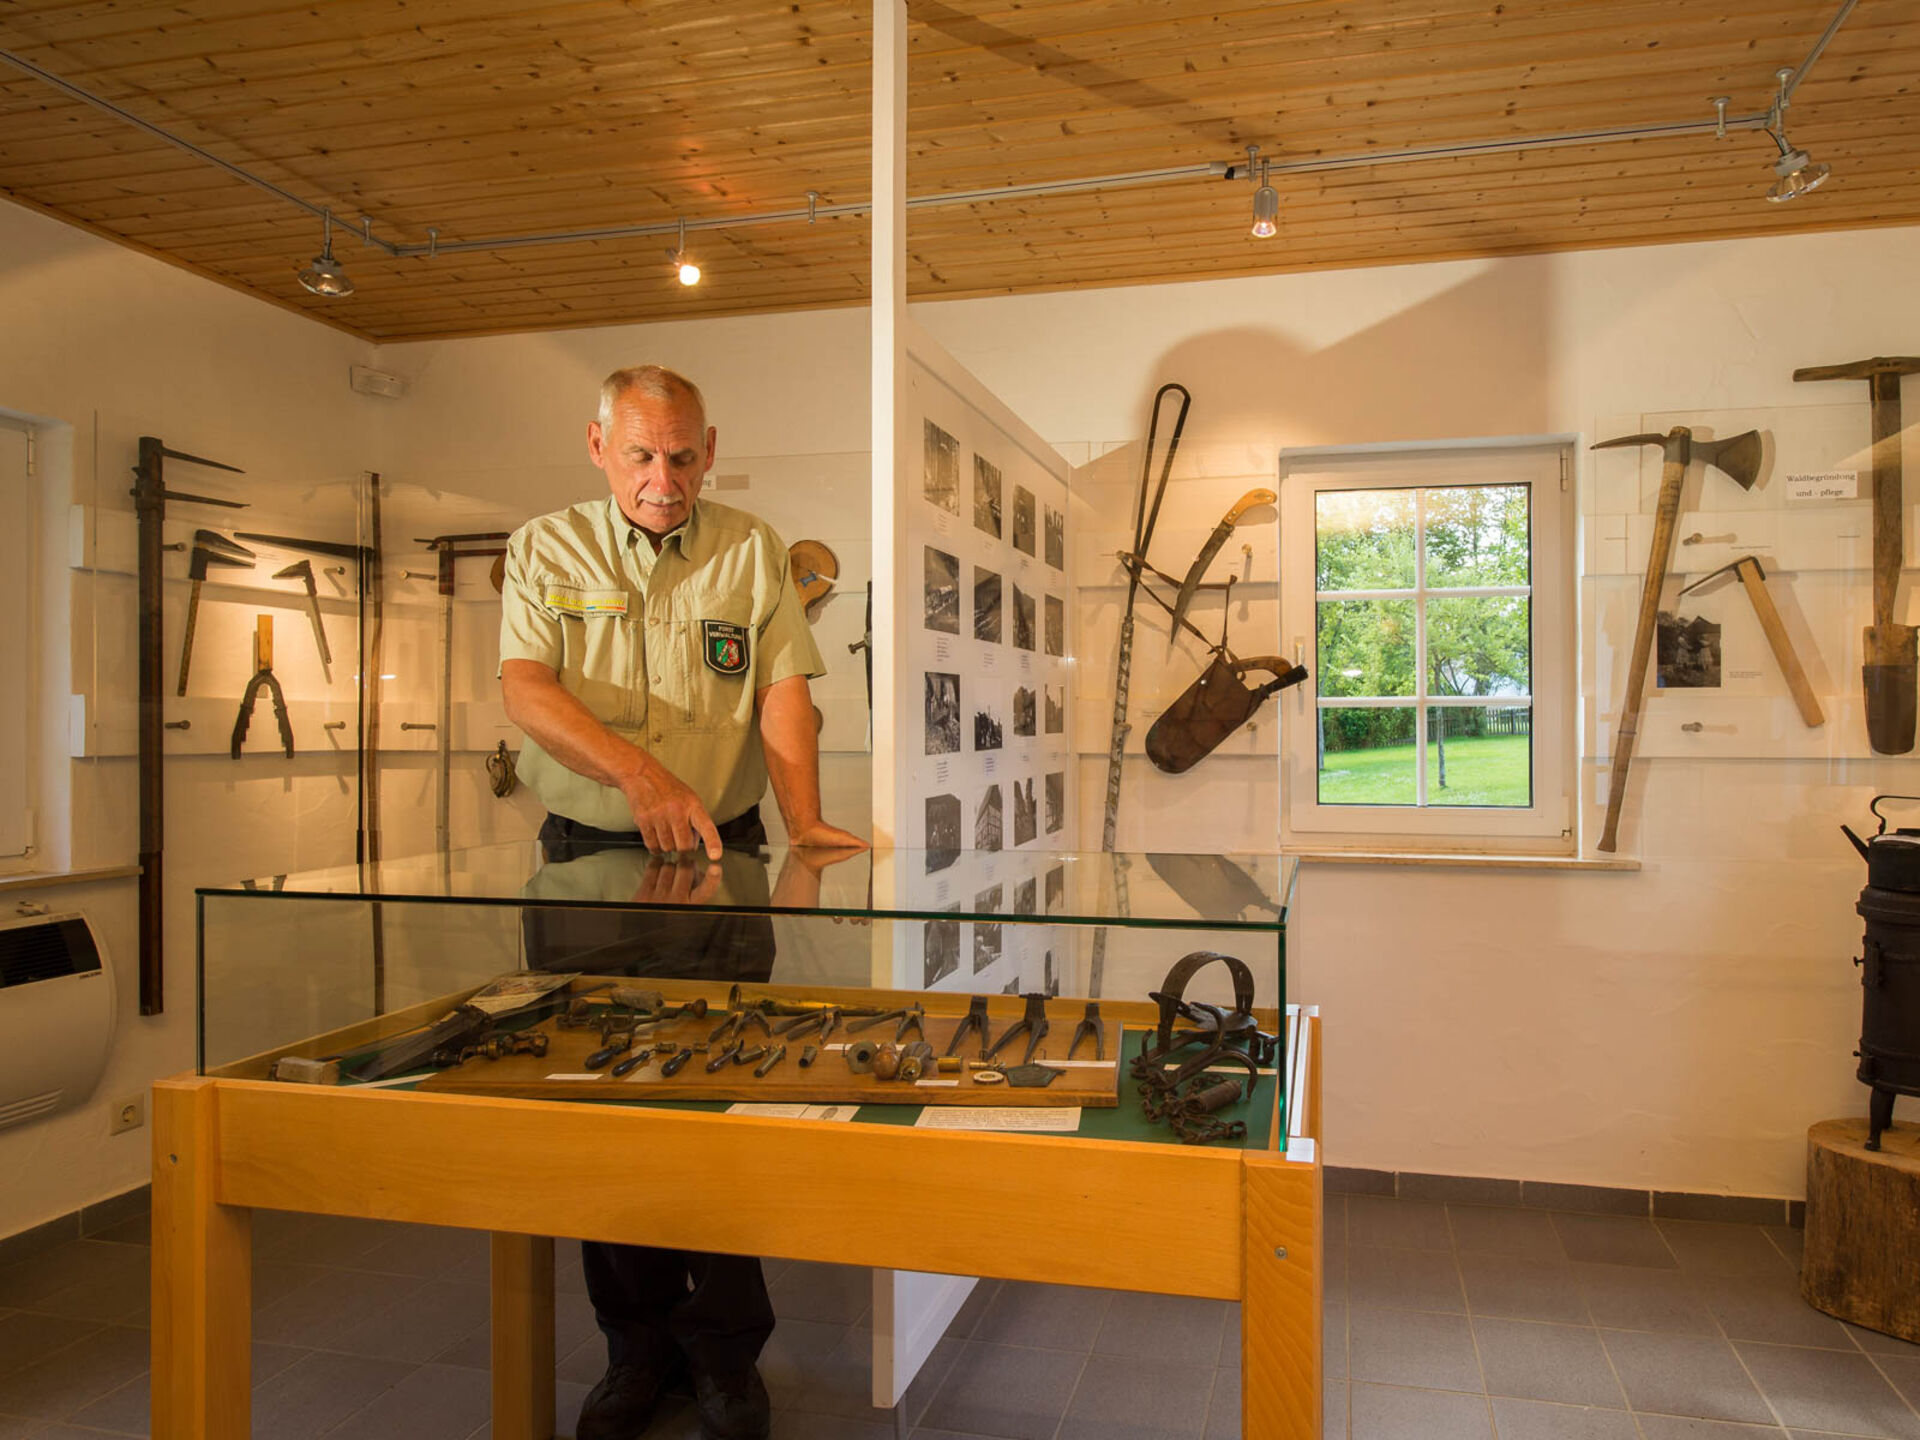 Exhibition in the forest workers museum in Latrop in the Schmallenberger Sauerland